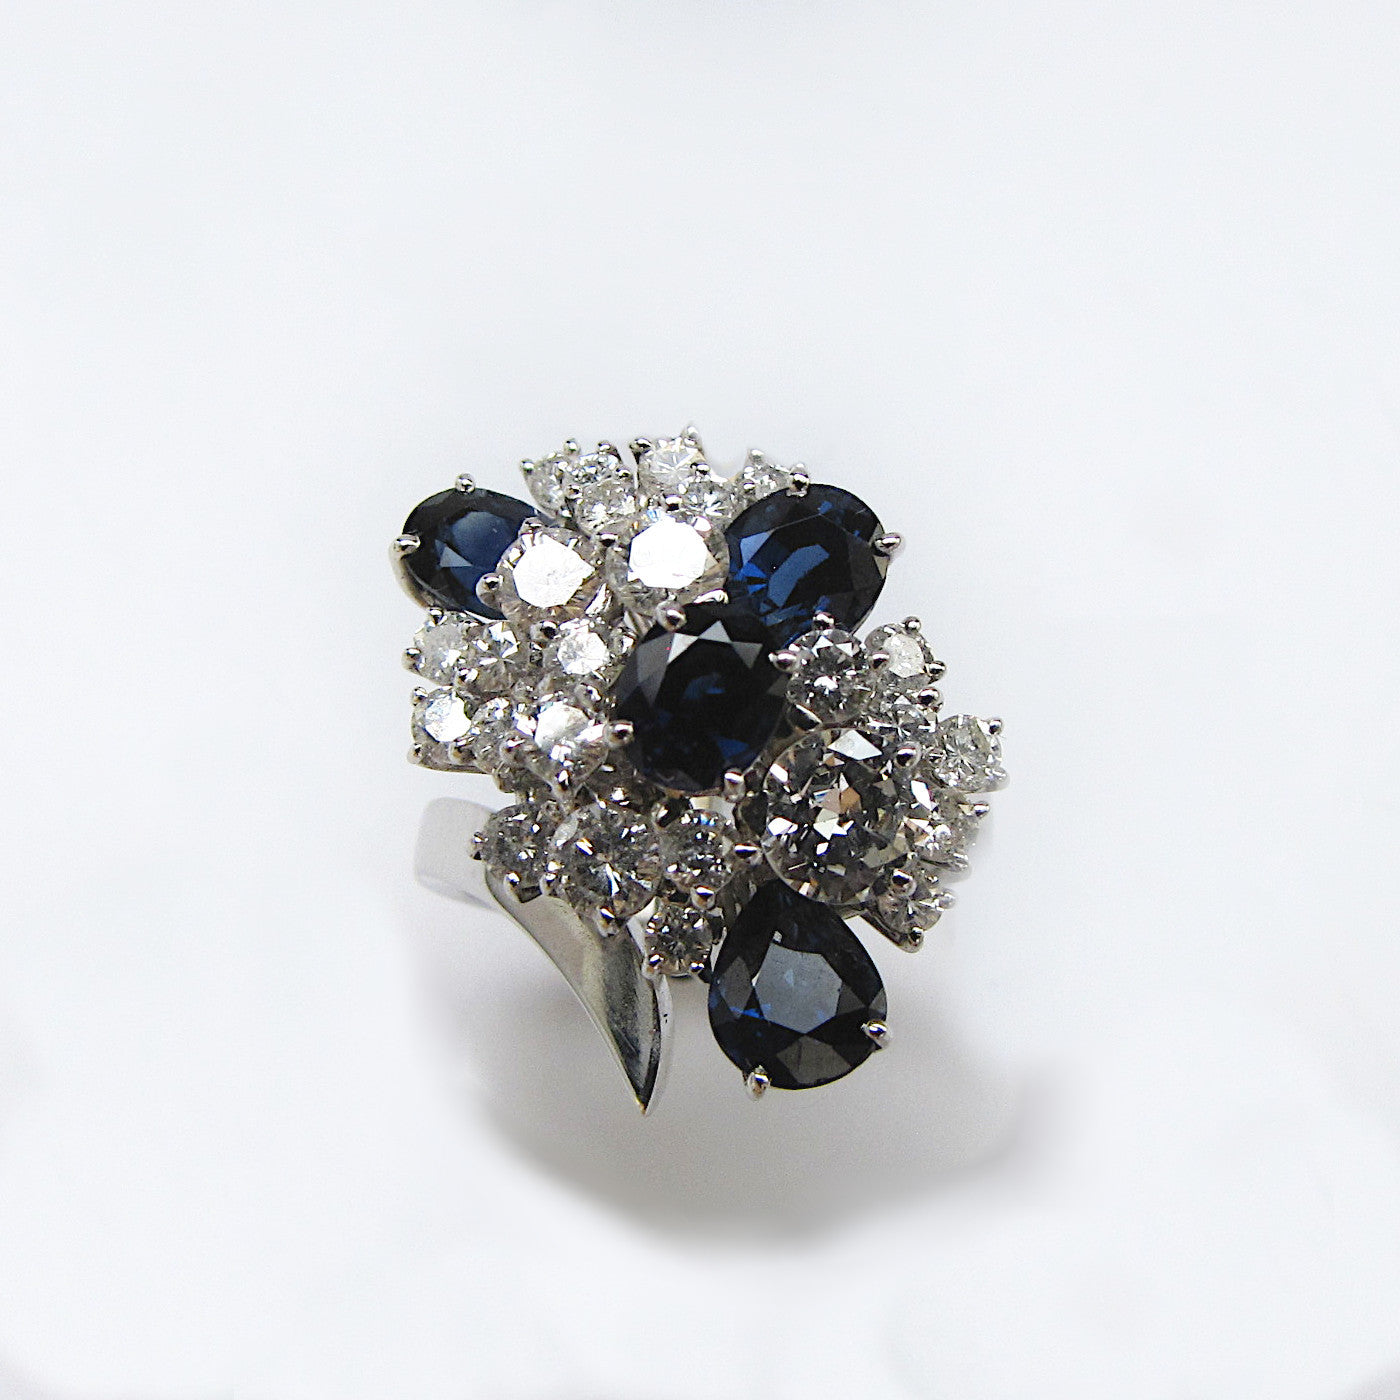 adorable ring, natural diamonds, natural sapphires, 18 K white gold, poids 7,50 g. (0.26 oz), width 23 mm max